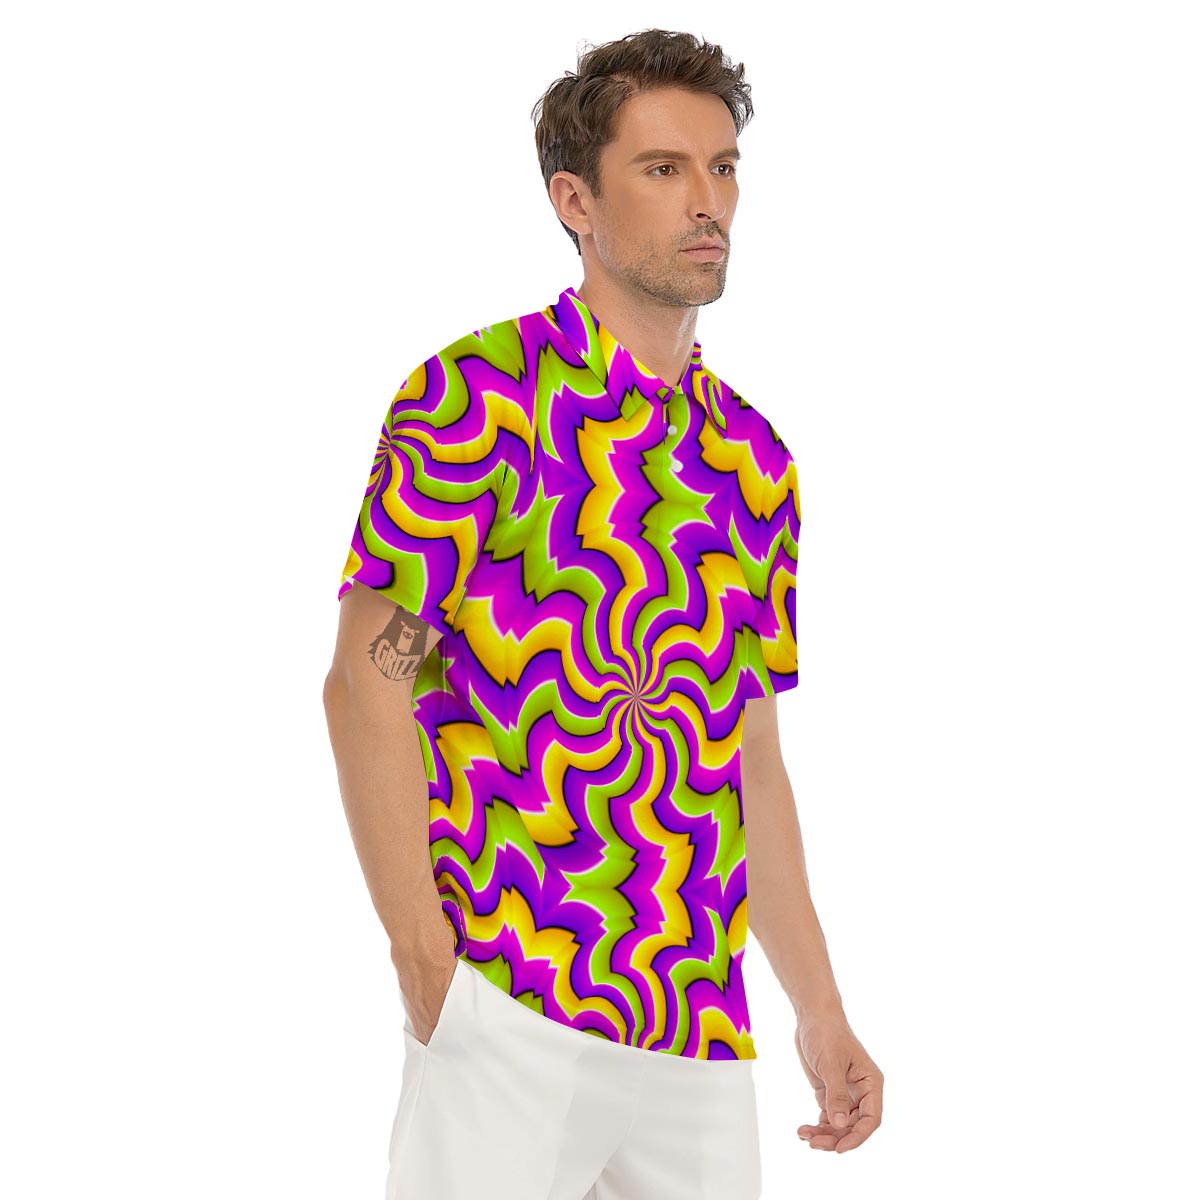 Zigzag Psychedelic Optical illusion Men's Golf Shirts-grizzshop